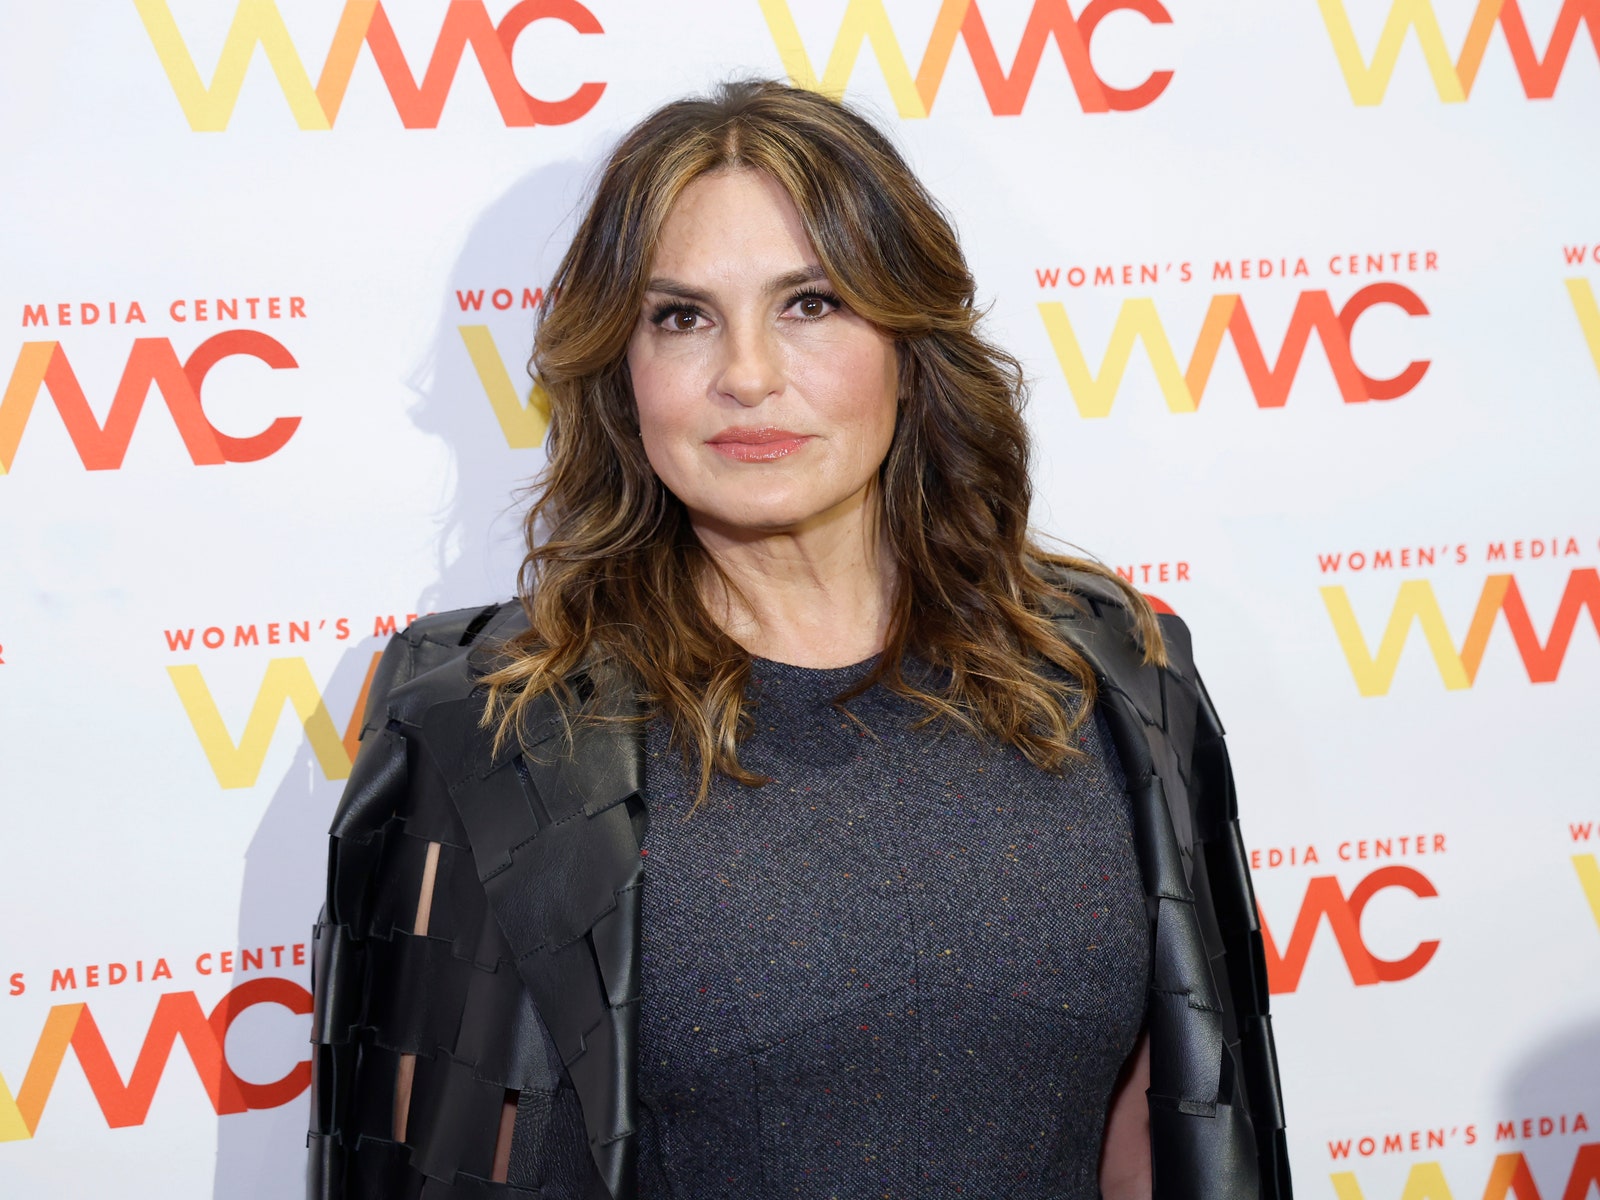 Mariska Hargitay Opened Up About Her Sexual Assault in an Emotional Essay